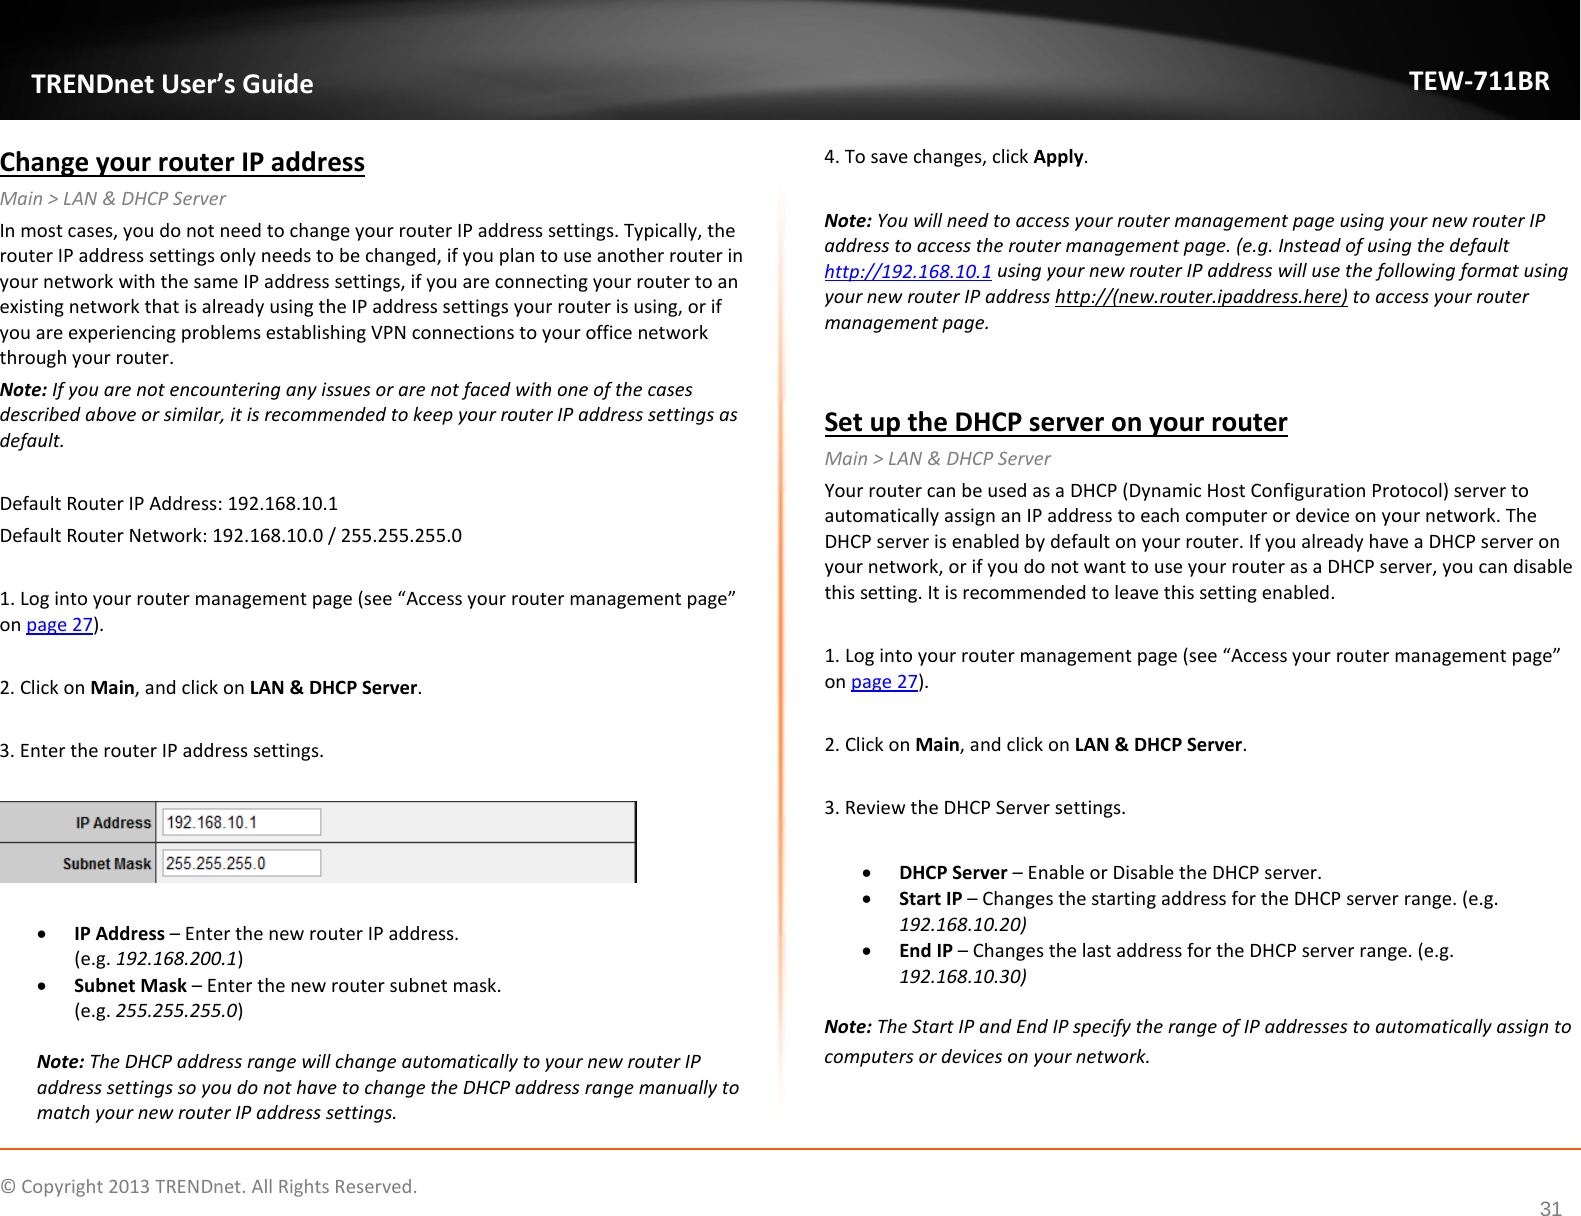              © Copyright 2013 TRENDnet. All Rights Reserved.       TRENDnet User’s Guide TEW-711BR 31 Change your router IP address Main &gt; LAN &amp; DHCP Server In most cases, you do not need to change your router IP address settings. Typically, the router IP address settings only needs to be changed, if you plan to use another router in your network with the same IP address settings, if you are connecting your router to an existing network that is already using the IP address settings your router is using, or if you are experiencing problems establishing VPN connections to your office network through your router. Note: If you are not encountering any issues or are not faced with one of the cases described above or similar, it is recommended to keep your router IP address settings as default.  Default Router IP Address: 192.168.10.1  Default Router Network: 192.168.10.0 / 255.255.255.0  1. Log into your router management page (see “Access your router management page” on page 27).  2. Click on Main, and click on LAN &amp; DHCP Server.  3. Enter the router IP address settings.    • IP Address – Enter the new router IP address.  (e.g. 192.168.200.1) • Subnet Mask – Enter the new router subnet mask. (e.g. 255.255.255.0)  Note: The DHCP address range will change automatically to your new router IP address settings so you do not have to change the DHCP address range manually to match your new router IP address settings.  4. To save changes, click Apply.  Note: You will need to access your router management page using your new router IP address to access the router management page. (e.g. Instead of using the default http://192.168.10.1 using your new router IP address will use the following format using your new router IP address http://(new.router.ipaddress.here) to access your router management page.   Set up the DHCP server on your router Main &gt; LAN &amp; DHCP Server Your router can be used as a DHCP (Dynamic Host Configuration Protocol) server to automatically assign an IP address to each computer or device on your network. The DHCP server is enabled by default on your router. If you already have a DHCP server on your network, or if you do not want to use your router as a DHCP server, you can disable this setting. It is recommended to leave this setting enabled.  1. Log into your router management page (see “Access your router management page” on page 27).  2. Click on Main, and click on LAN &amp; DHCP Server.  3. Review the DHCP Server settings.  • DHCP Server – Enable or Disable the DHCP server. • Start IP – Changes the starting address for the DHCP server range. (e.g. 192.168.10.20) • End IP – Changes the last address for the DHCP server range. (e.g. 192.168.10.30)  Note: The Start IP and End IP specify the range of IP addresses to automatically assign to computers or devices on your network.  